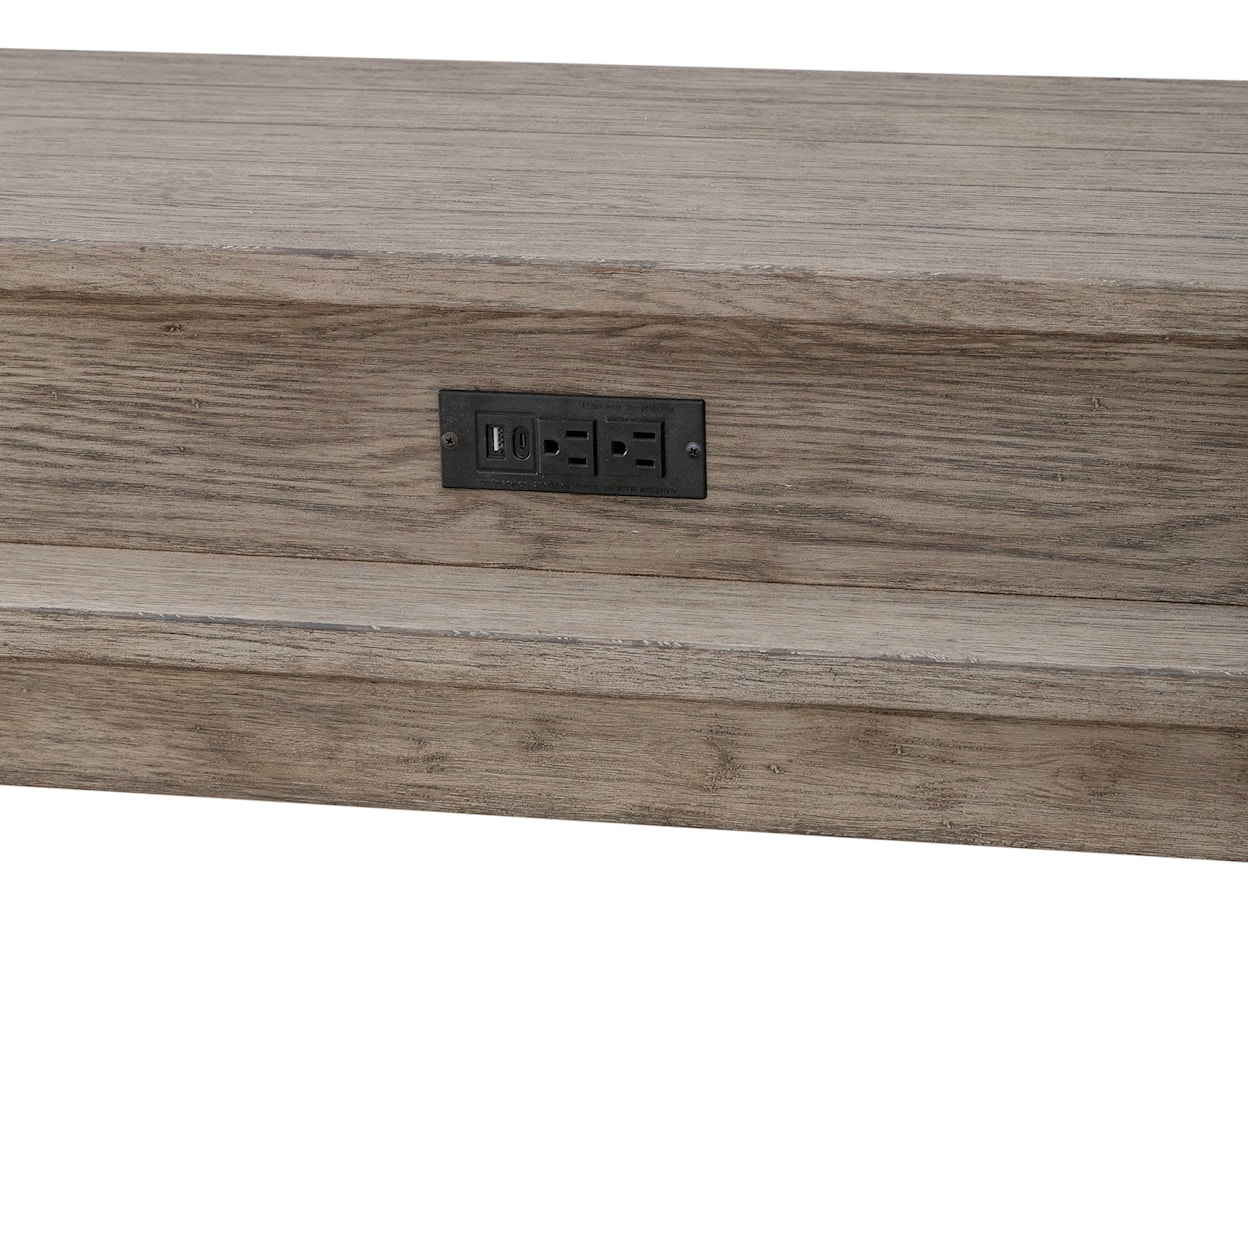 Libby Skyview Lodge Console Counter-Height Table